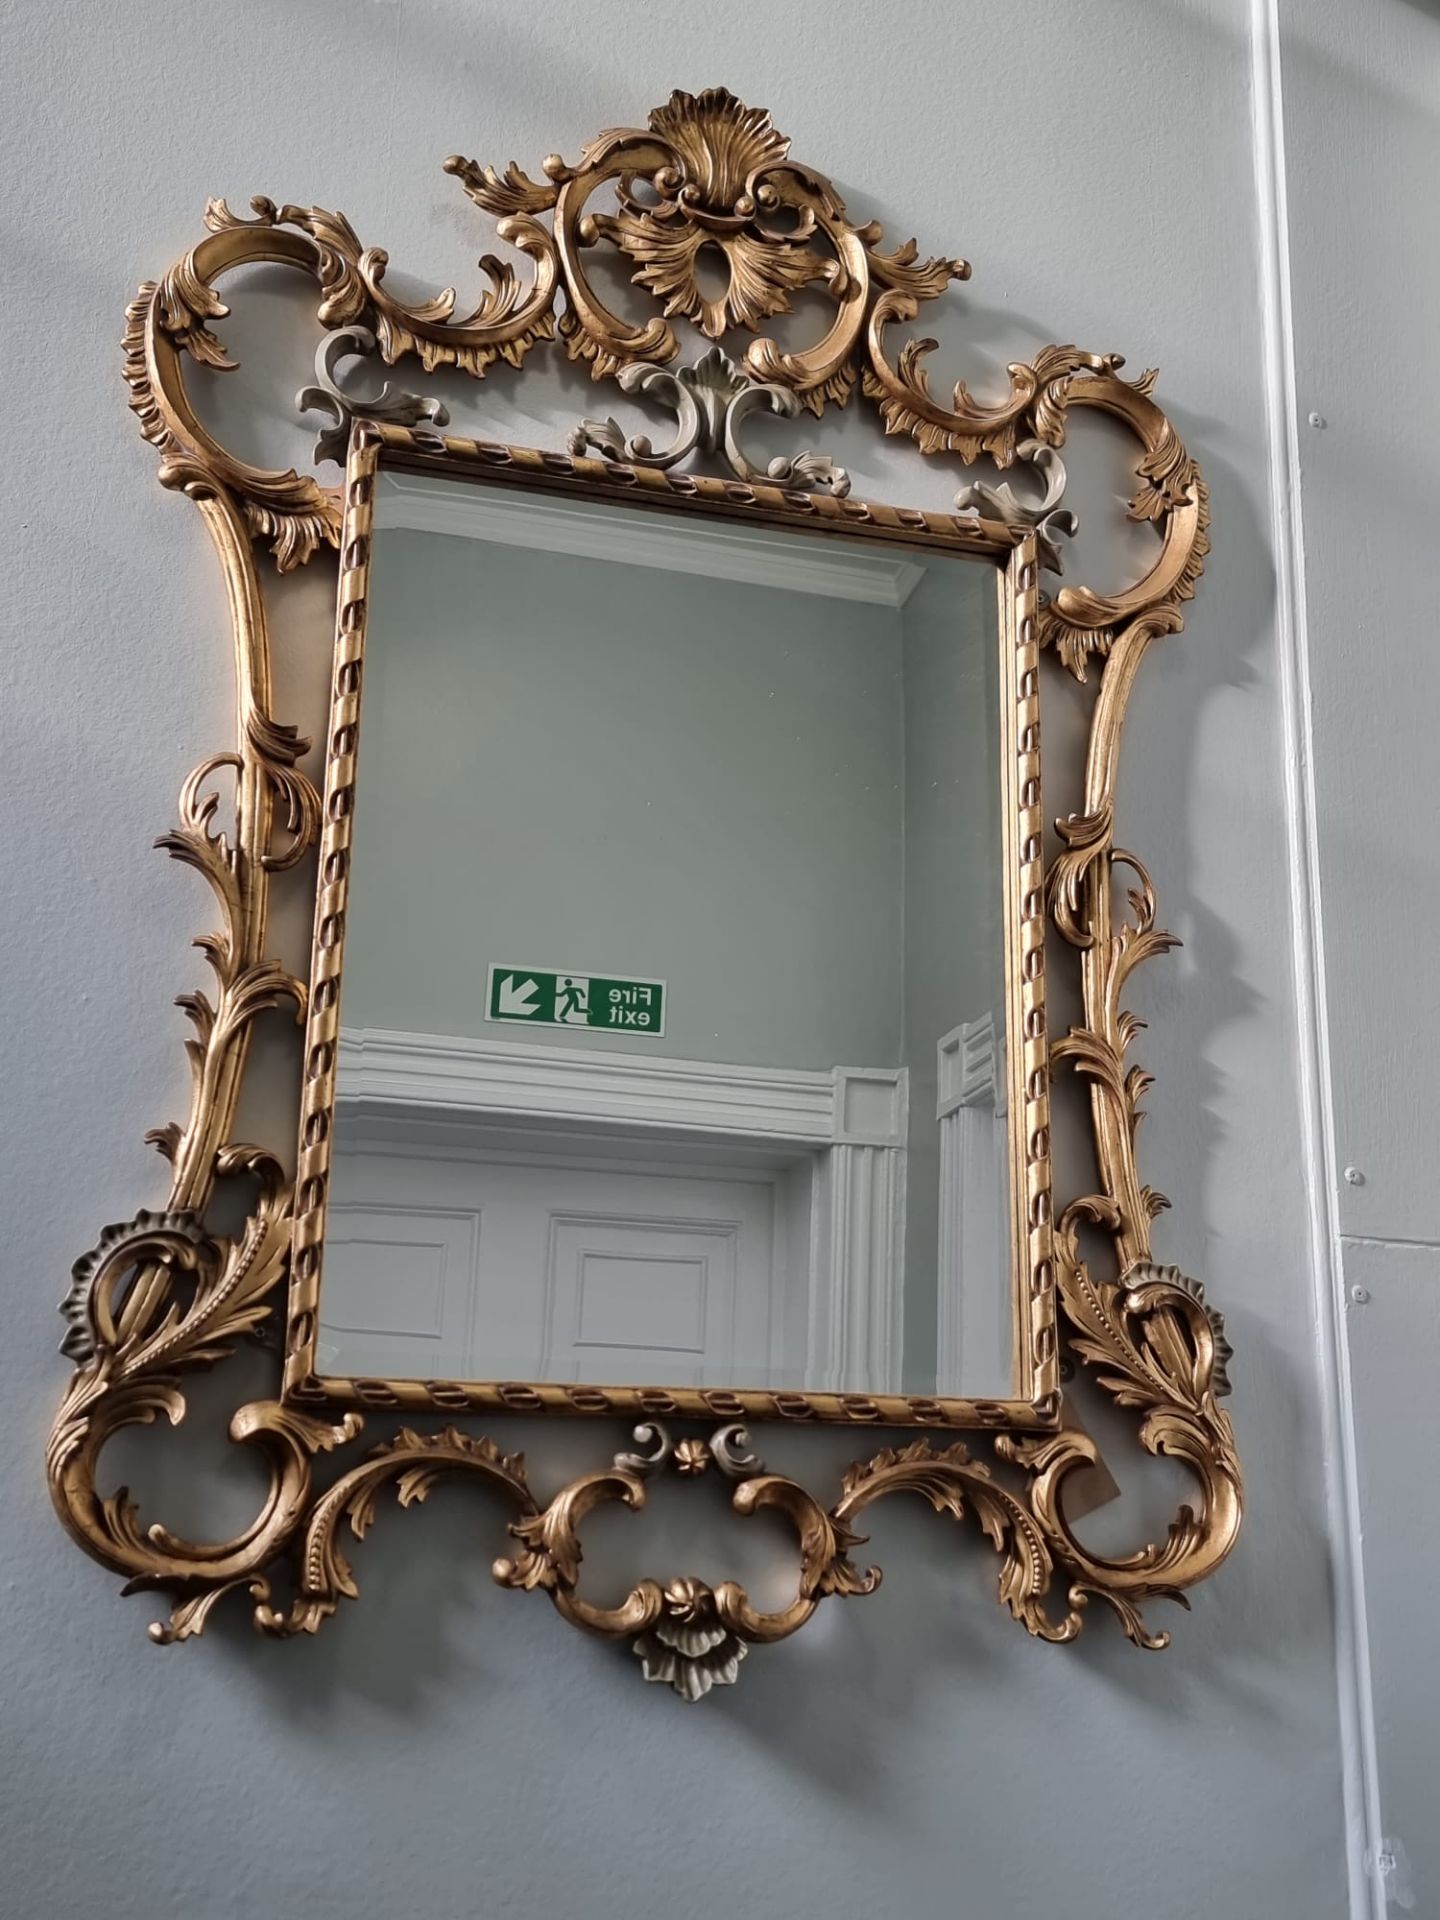 Monumental Louis XV Style Gilt Pier Mirror  Carved And Gilt Overmantle Or Pier Mirror. Original - Image 2 of 5